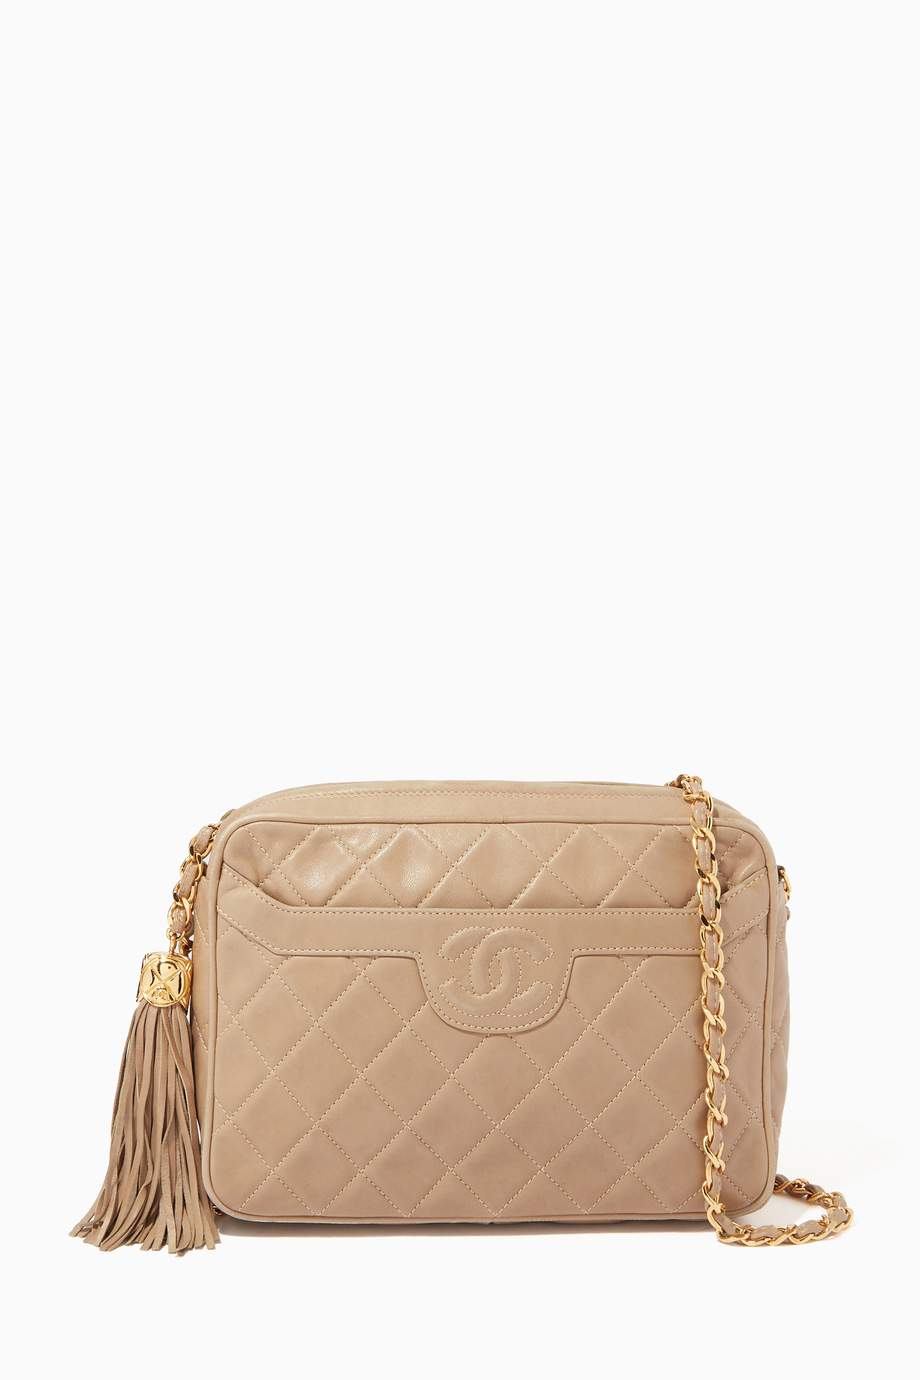 Shop Chanel Vintage Neutral CC Crossbody Bag in Quilted Leather for Women | Ounass UAE